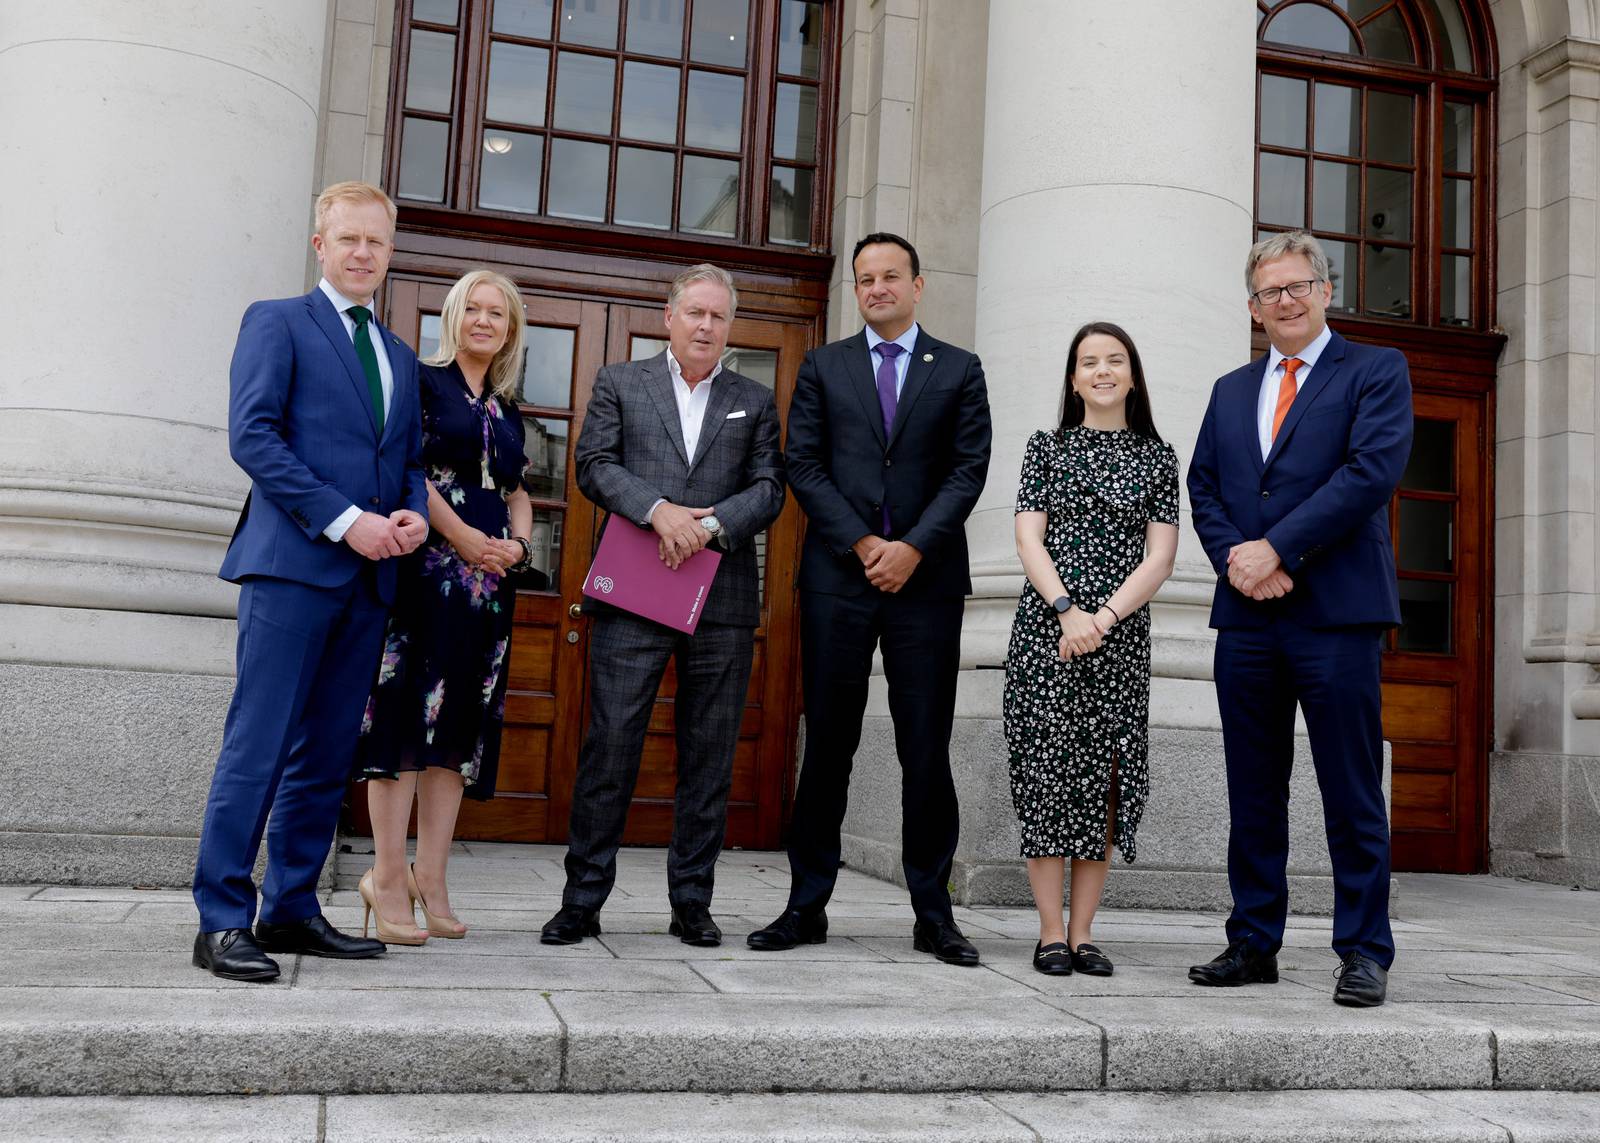 From left: Dónal Travers, global head of technology & CCBS; Deirdre Ardagh, Three, senior privacy and public policy counsel; Robert Finnegan CEO, Three Ireland and Three UK; Tánaiste Leo Varadkar; Sarah Connelly, project executive, IDA; and Andrew Vogelaar, head of growth markets, IDA, at Government buildings.  Photograph:  Maxwells